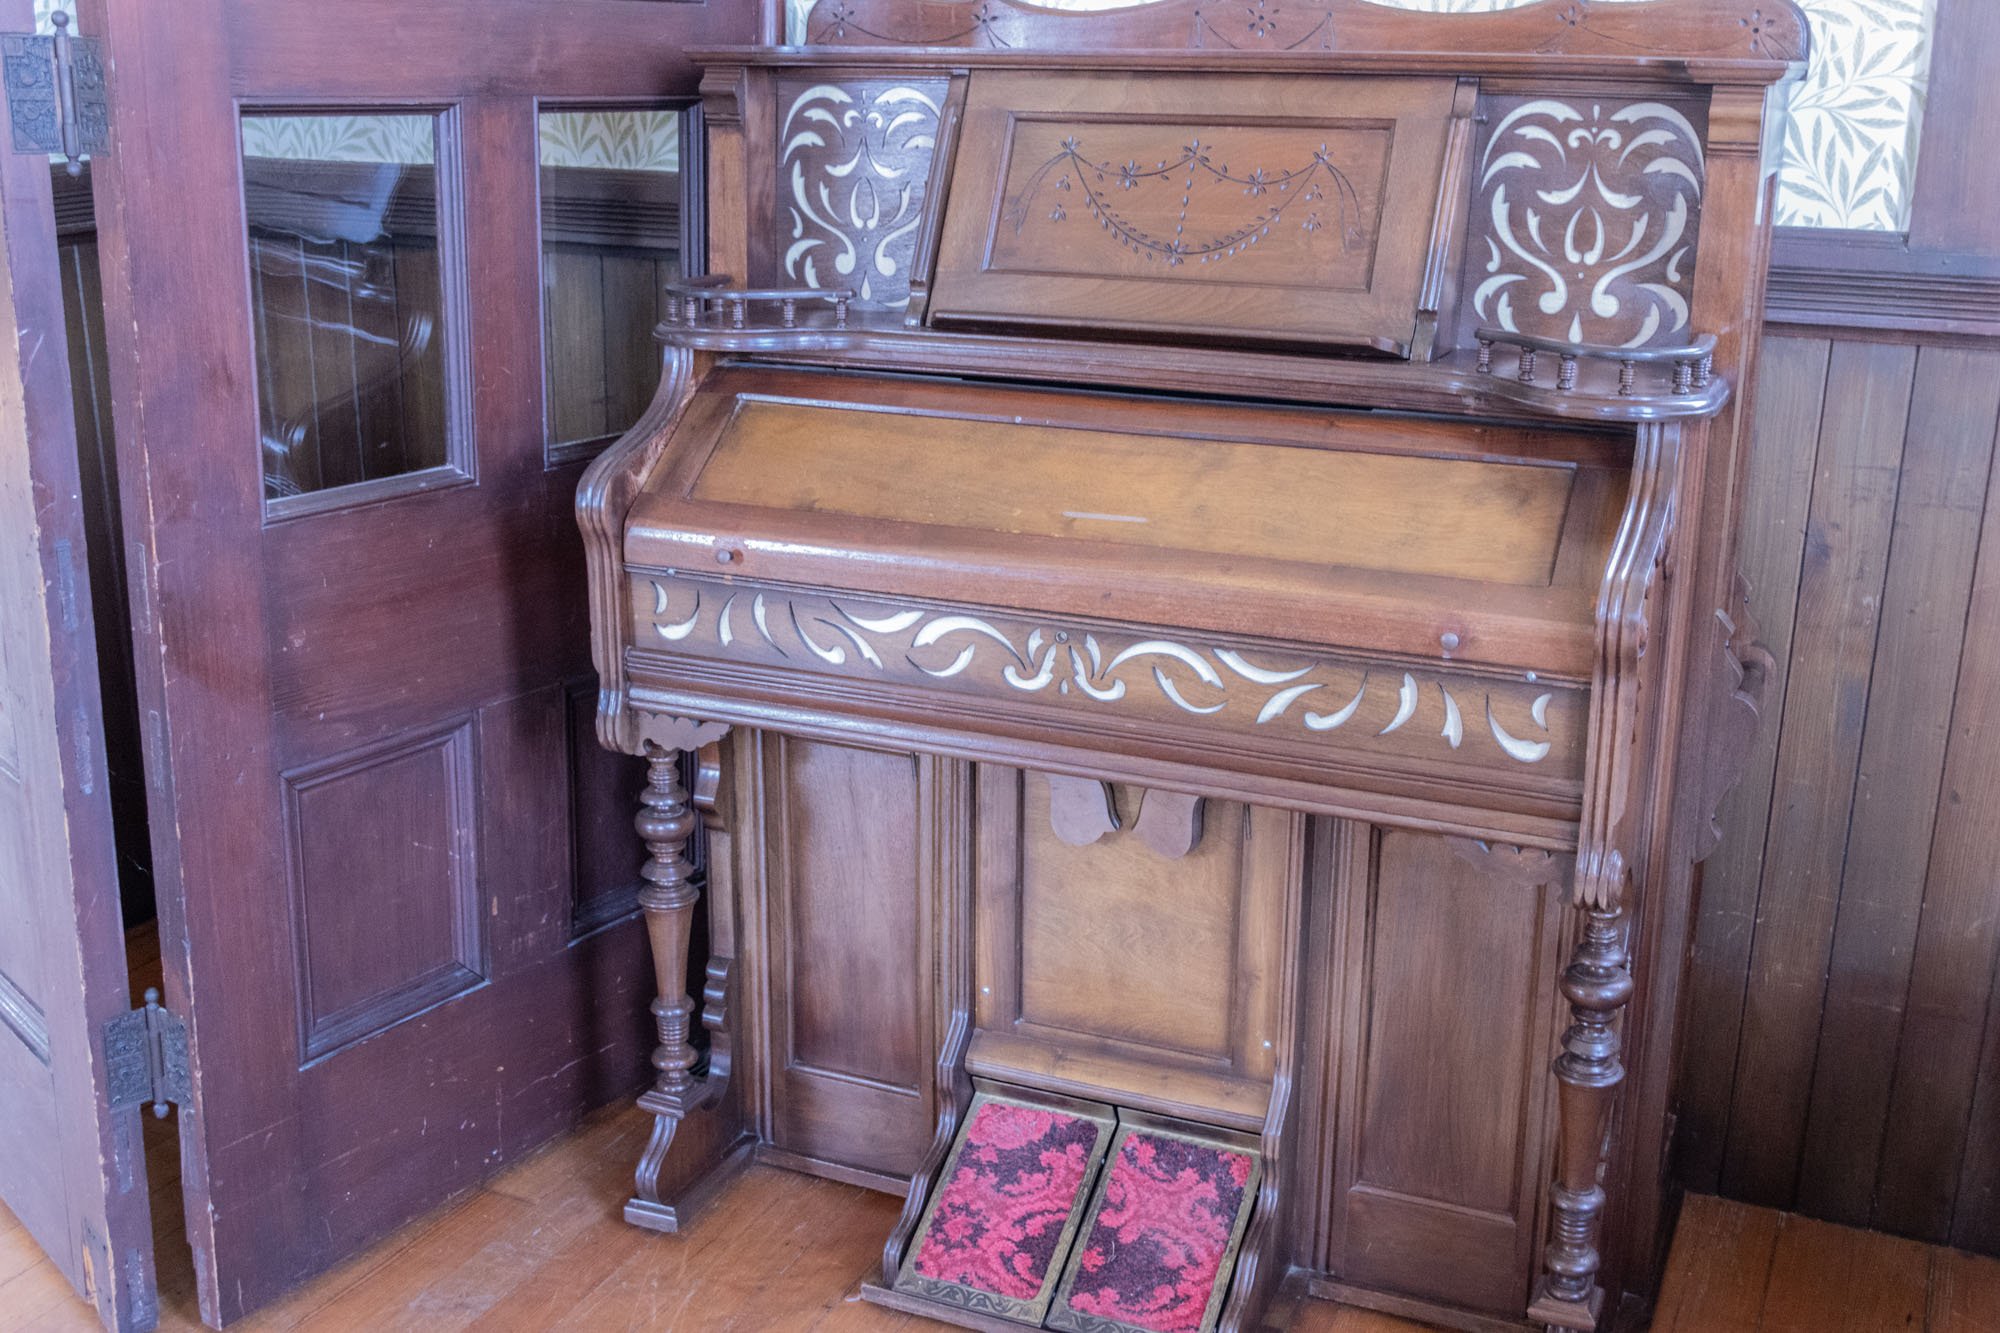 Oysterville Church Piano.jpg